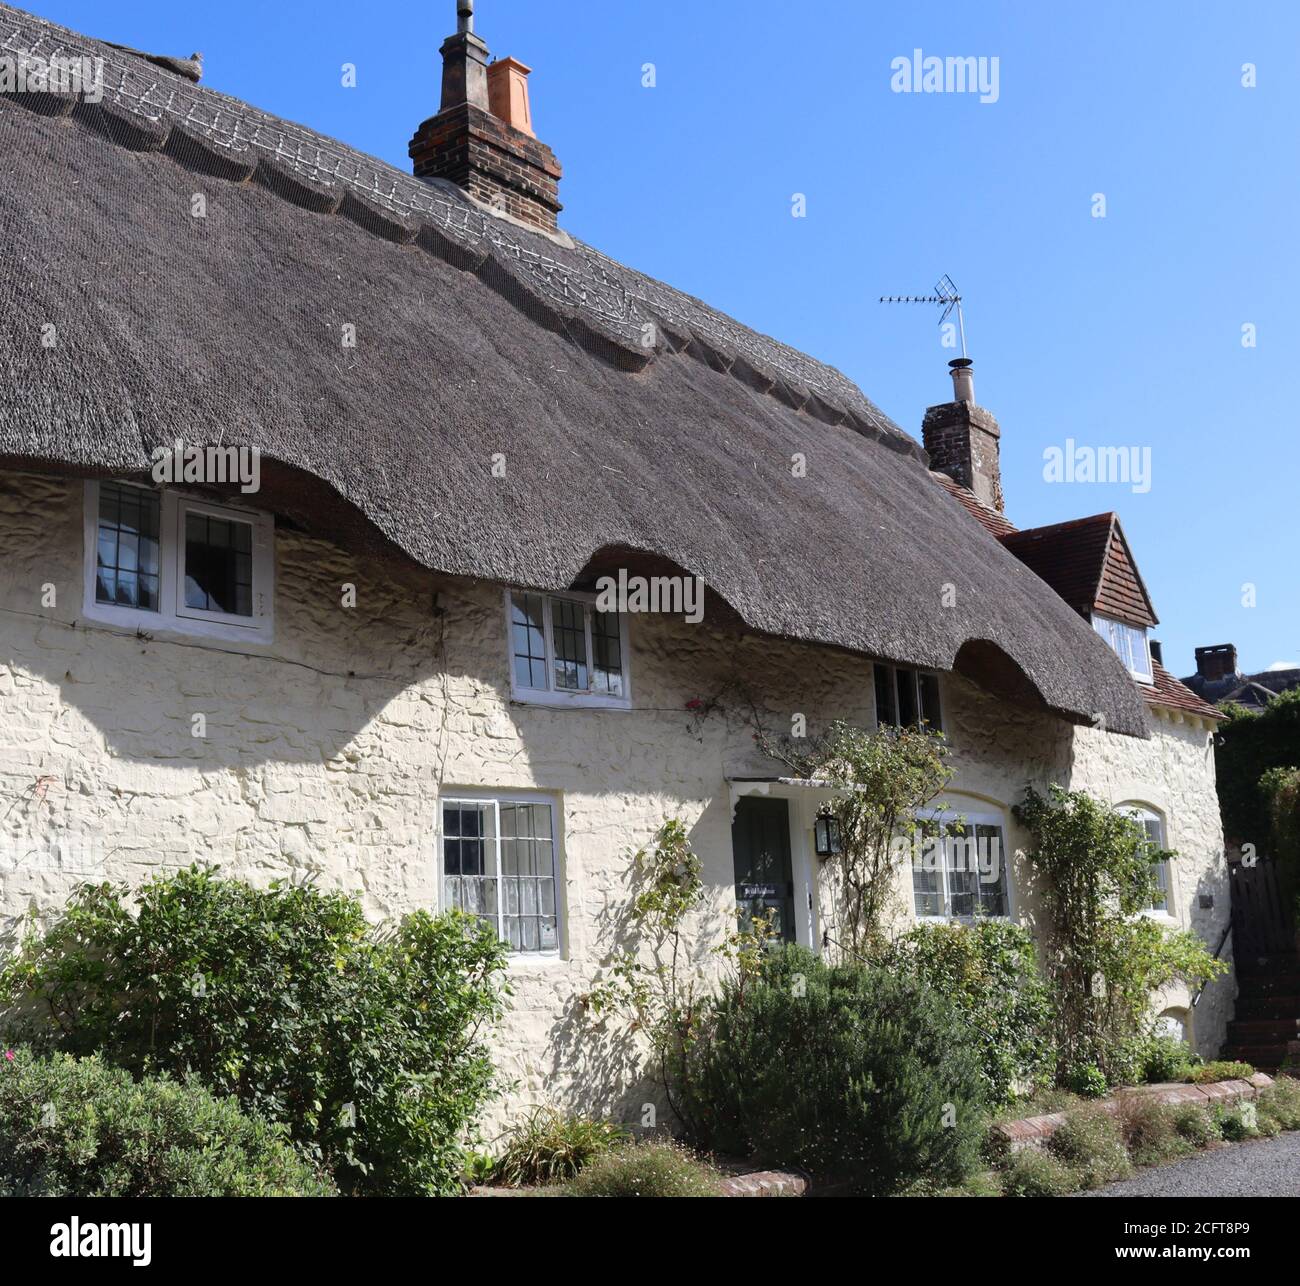 Cottage with thatched roof in Amberley Stock Photo